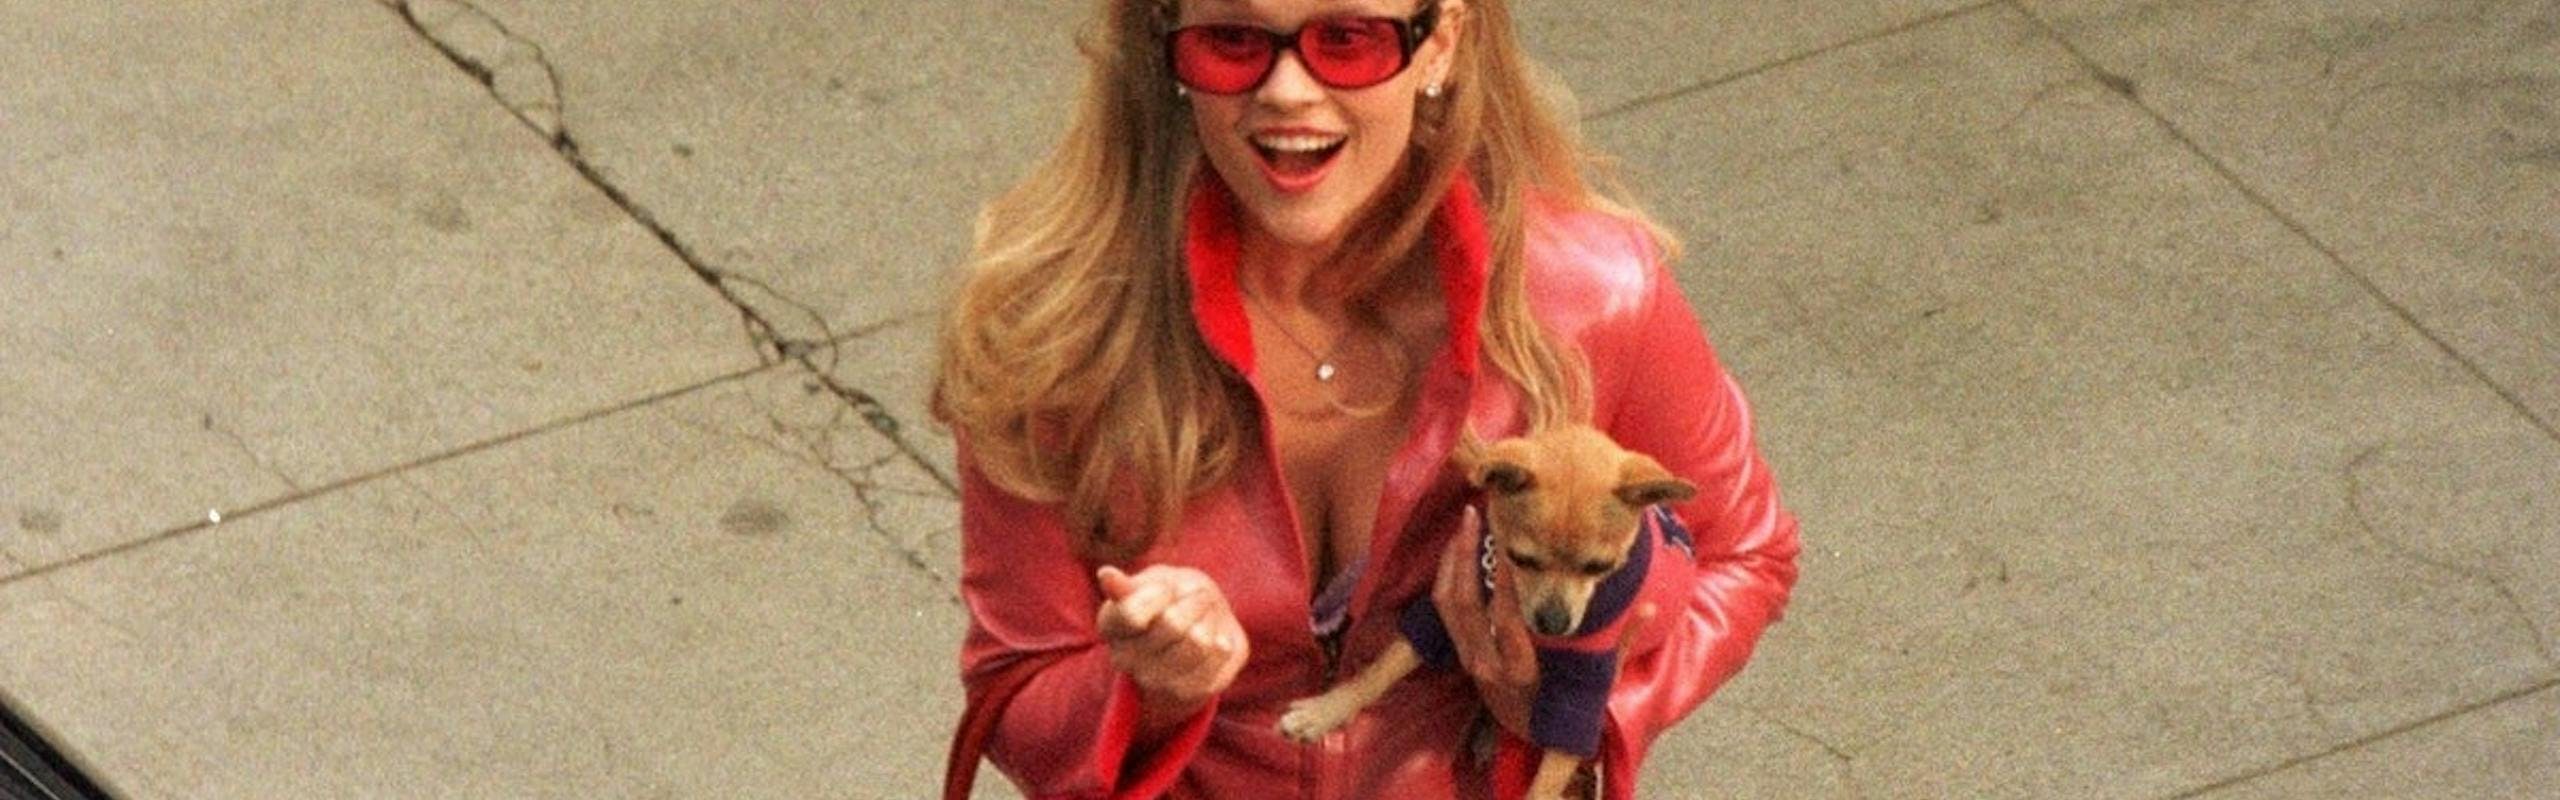 Elle Woods rocking the Barbiecore trend on set of Legally Blonde in a pink leather outfit. 